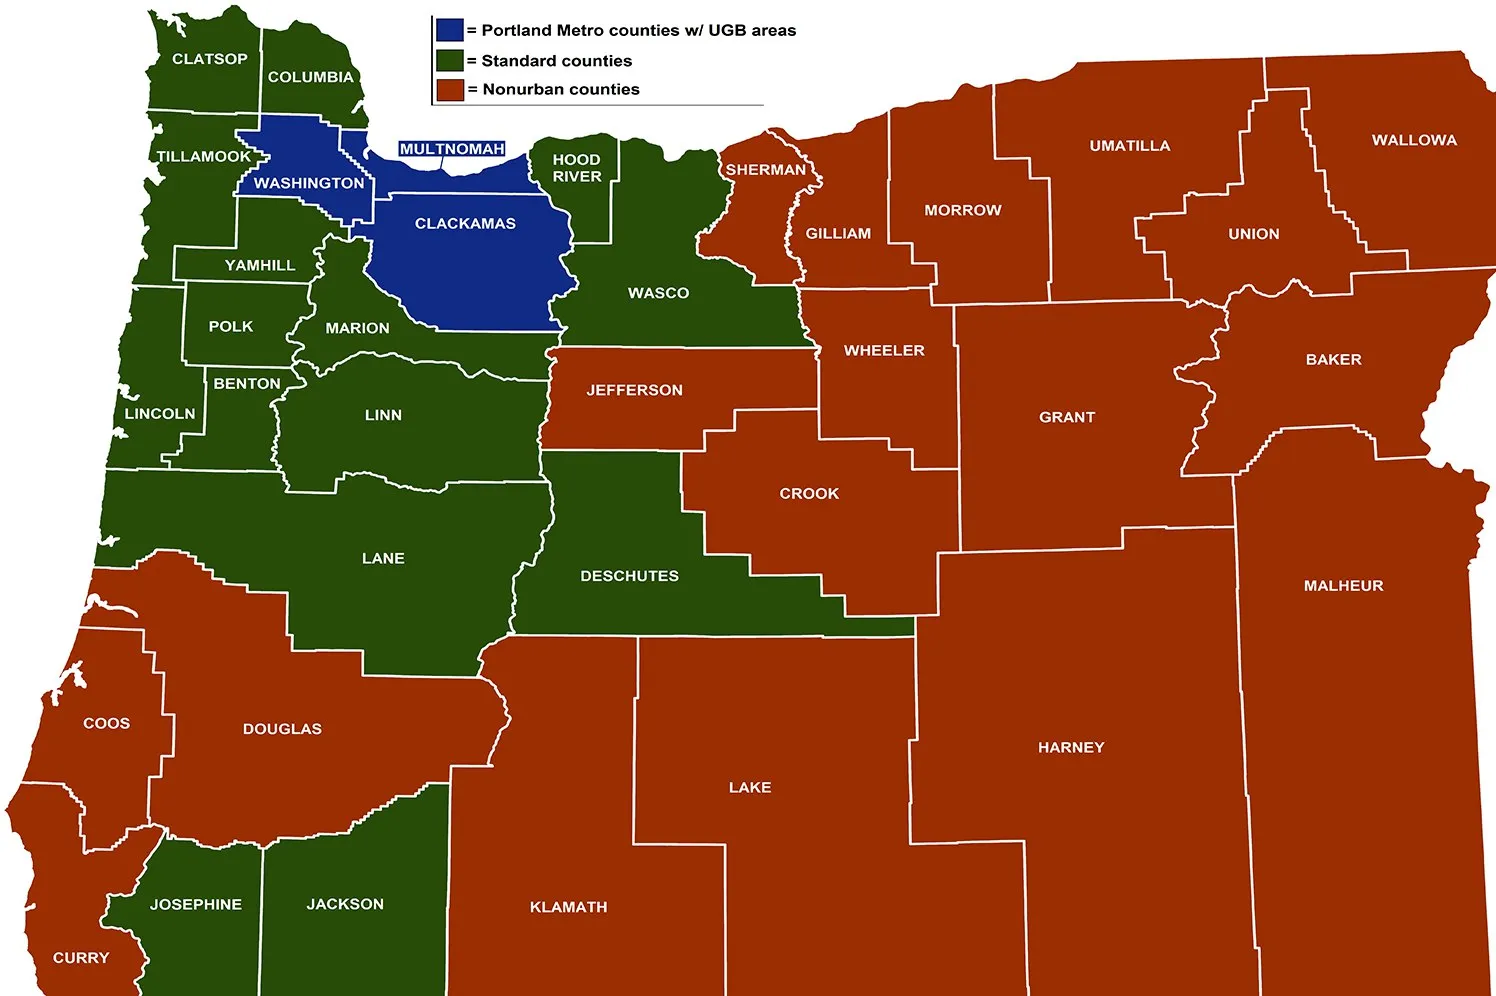 oregon's standard and non-urban counties